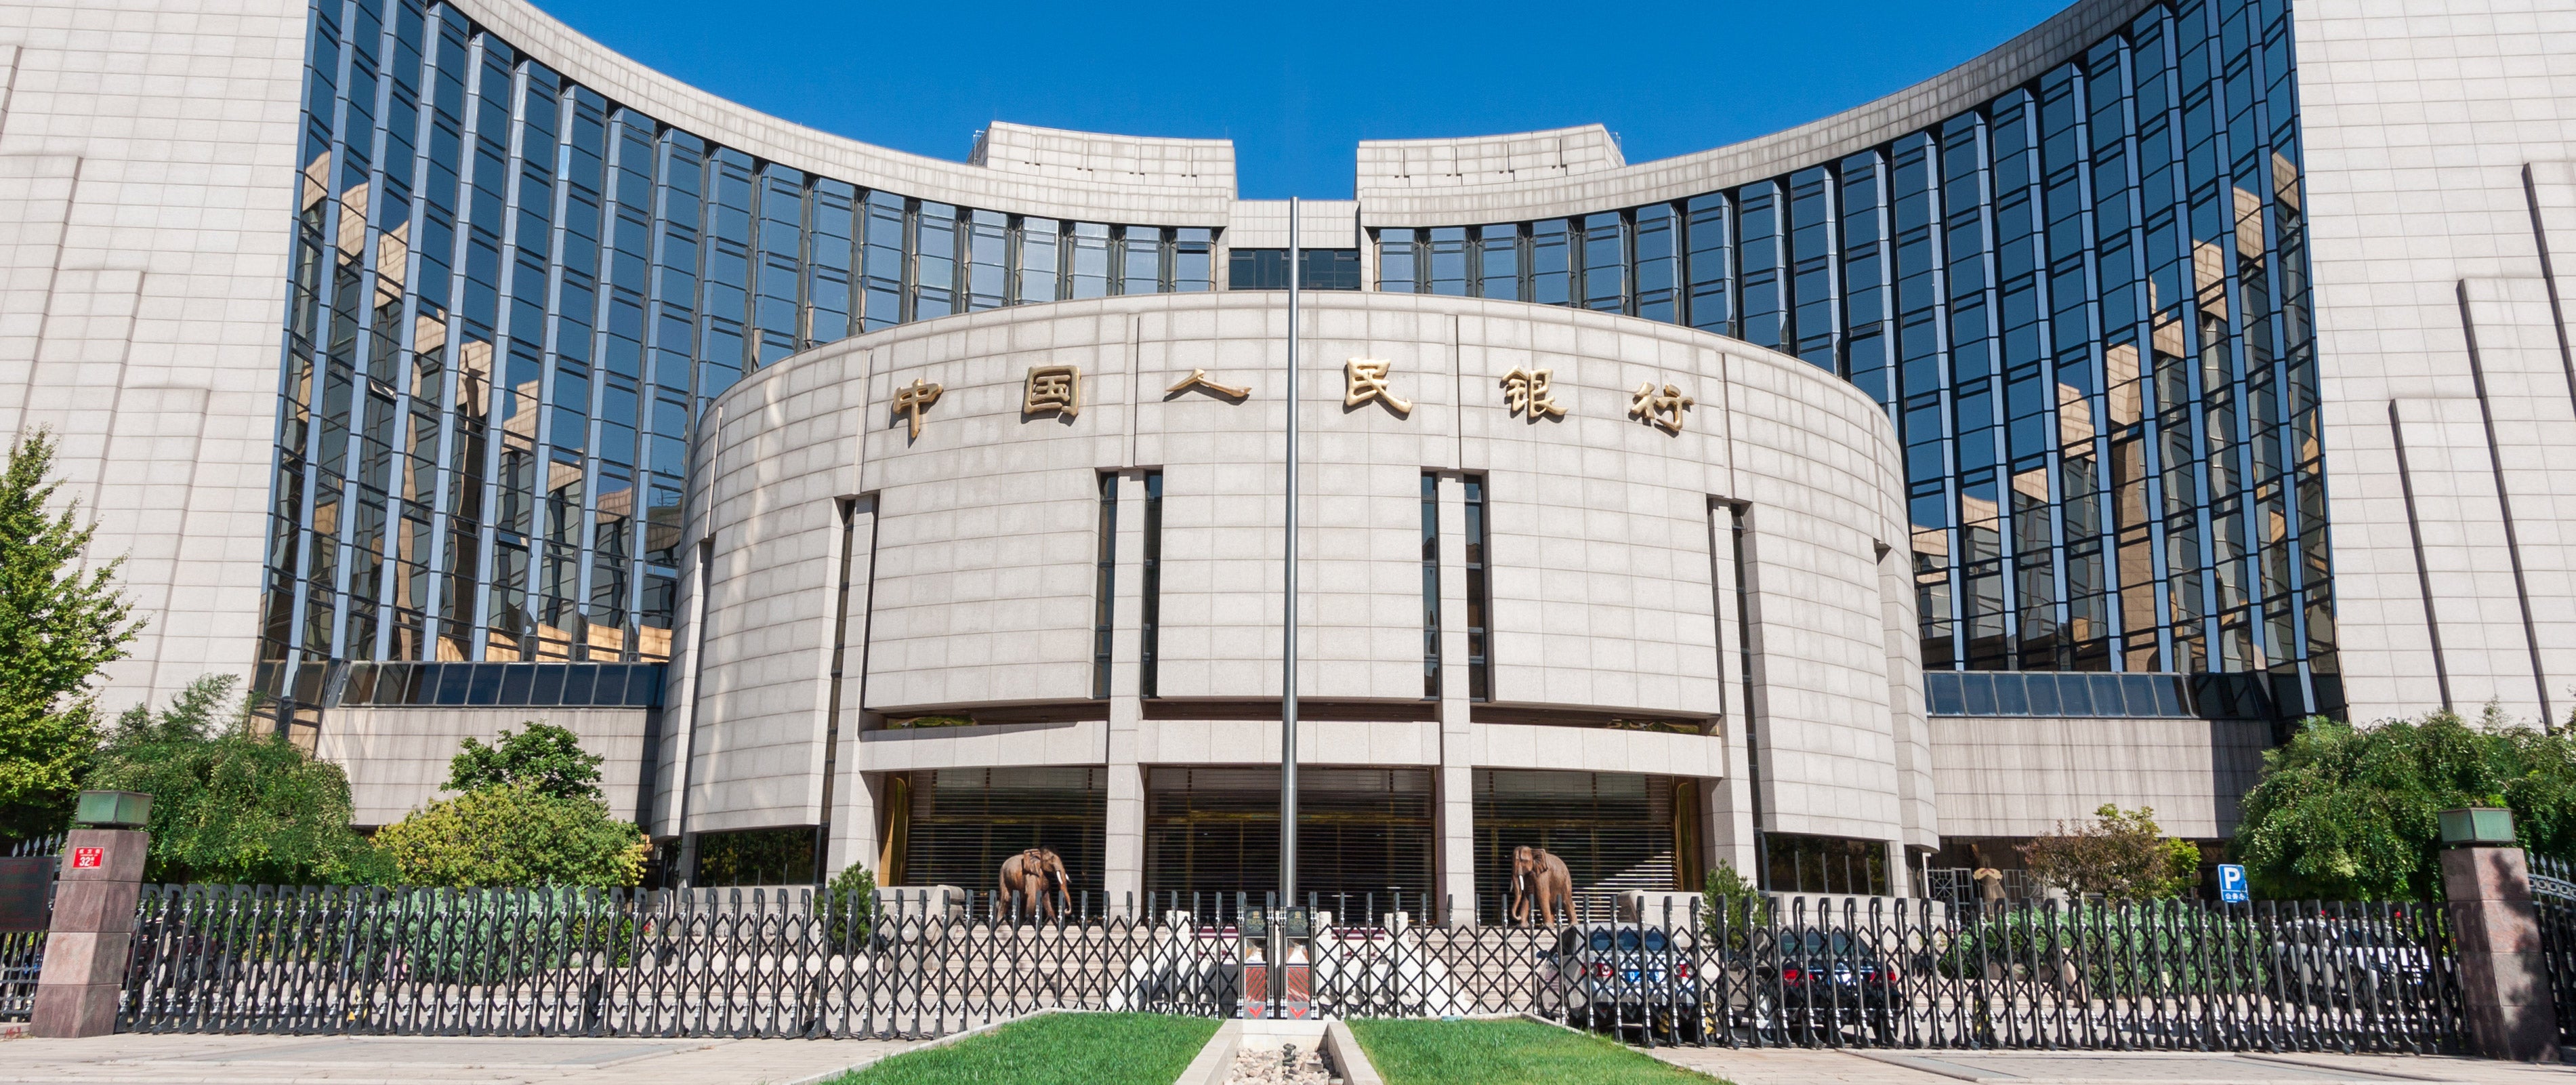 People's Bank of China front view. | shutterstock.com